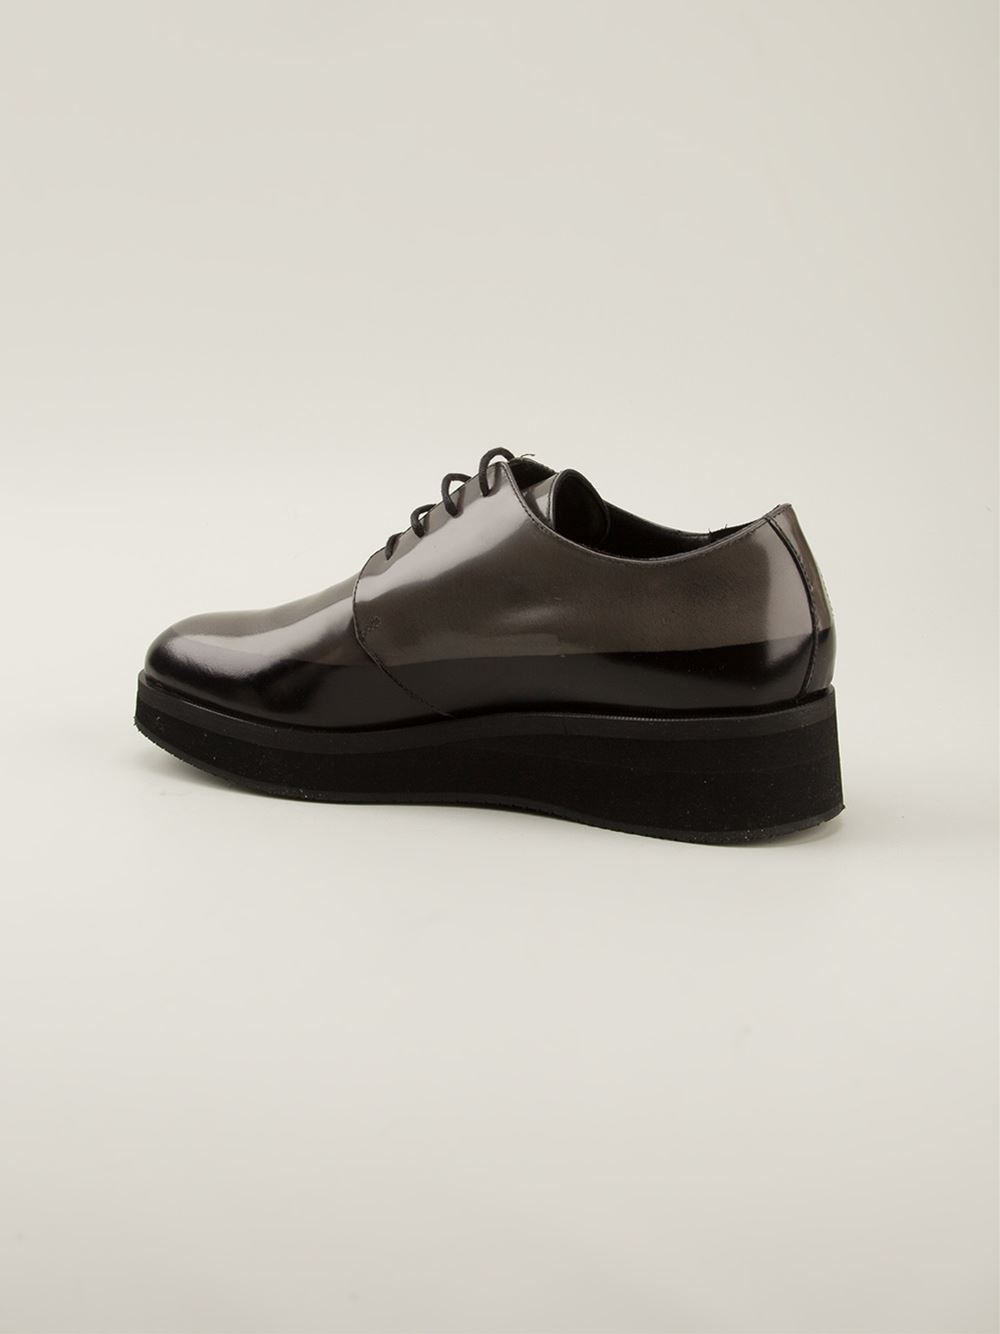 chunky sole shoes mens